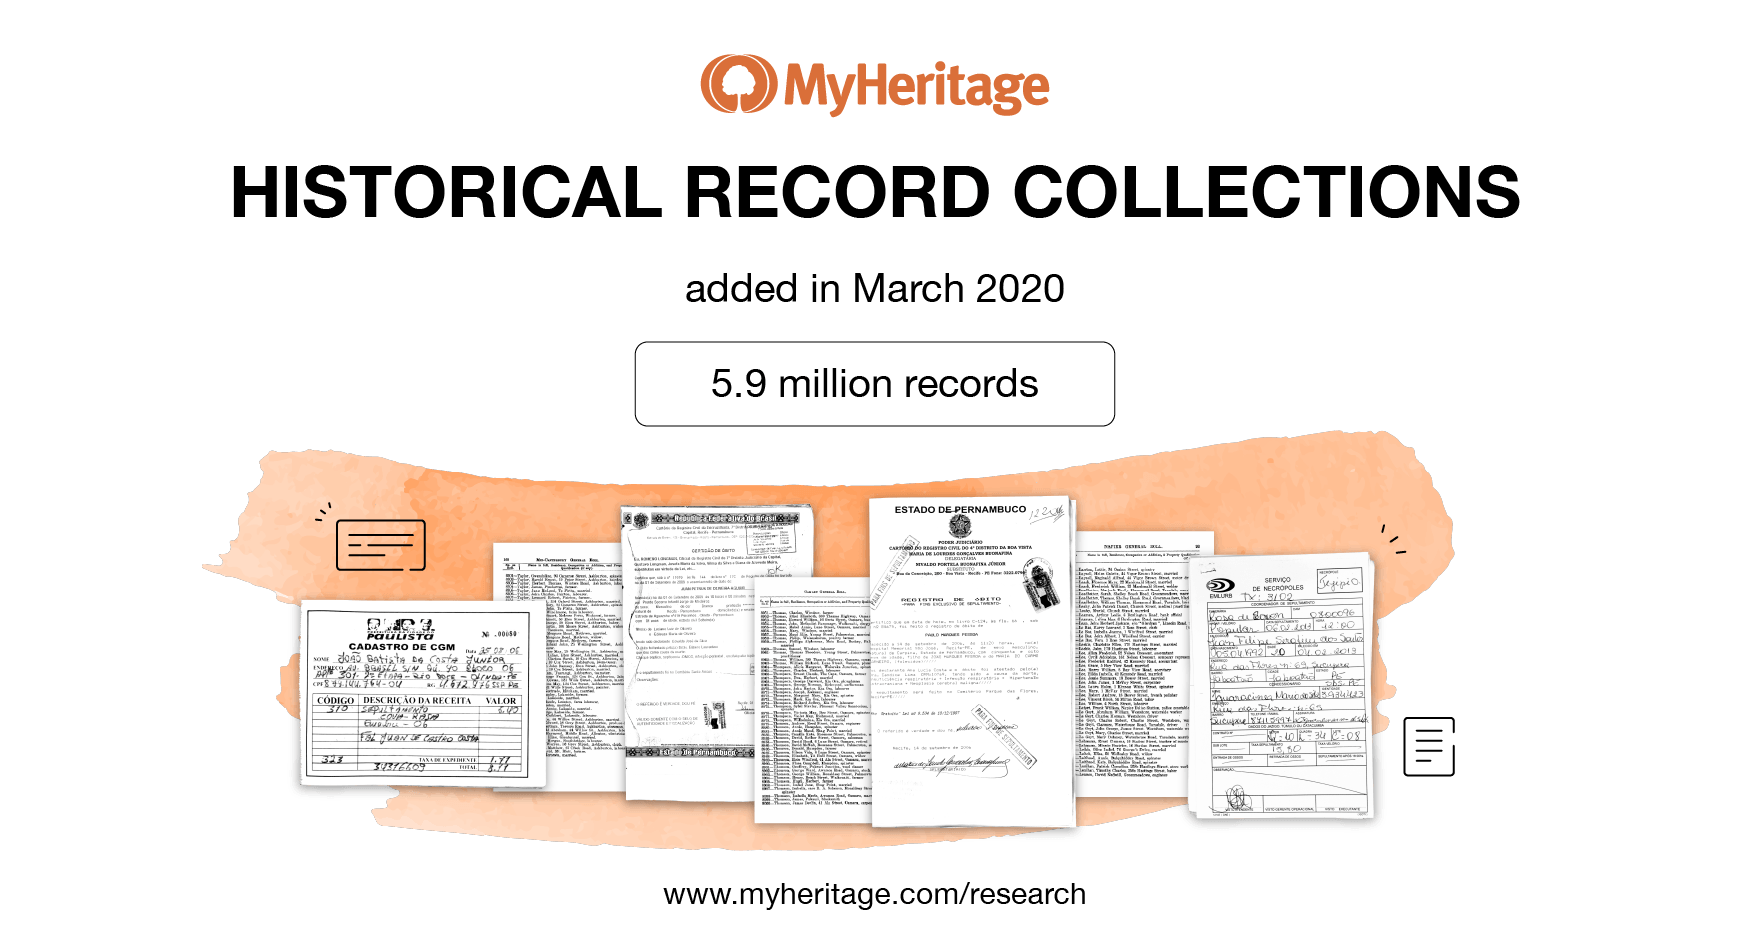 Historical Record Collections Added in March 2020